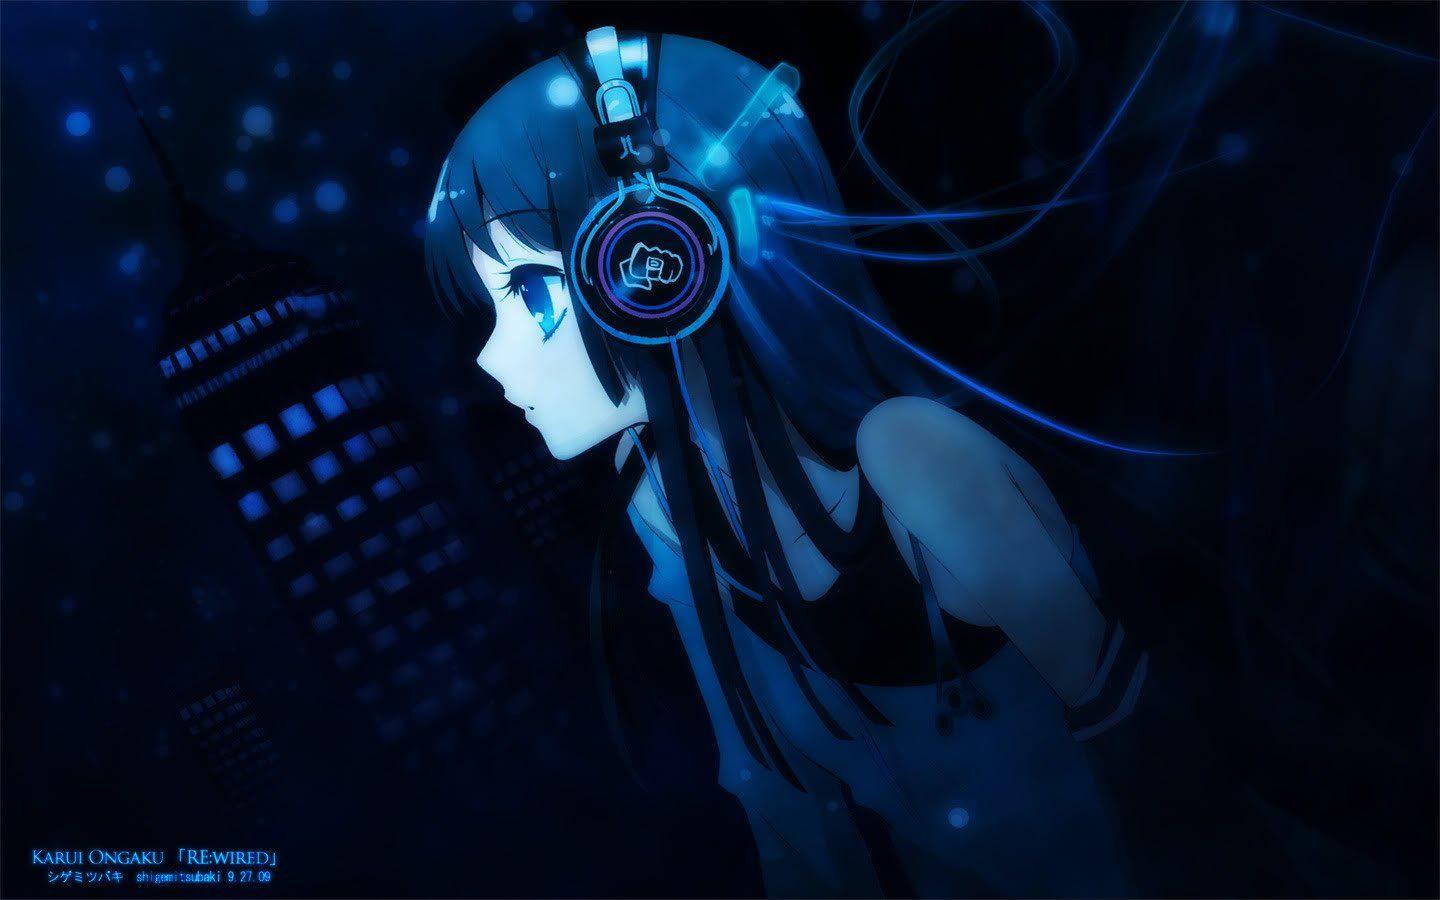 Awesome Headset Photo Collection: Headset Wallpaper